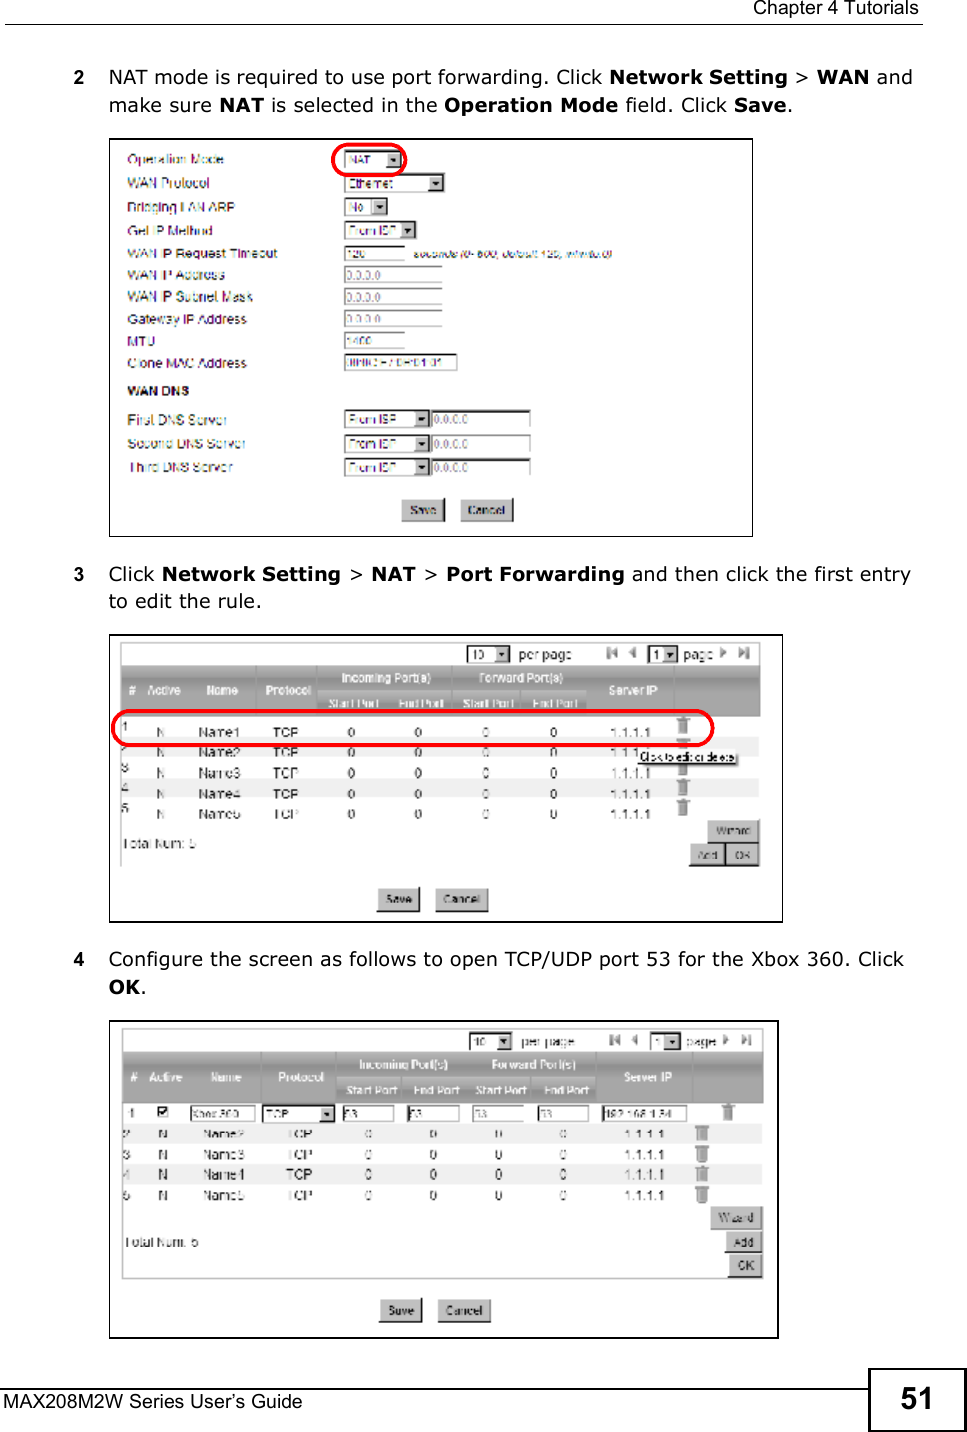  Chapter 4TutorialsMAX208M2W Series User s Guide 512NAT mode is required to use port forwarding. Click Network Setting &gt; WAN and make sure NAT is selected in the Operation Mode field. Click Save.3Click Network Setting &gt; NAT &gt; Port Forwarding and then click the first entry to edit the rule.4Configure the screen as follows to open TCP/UDP port 53 for the Xbox 360. Click OK.